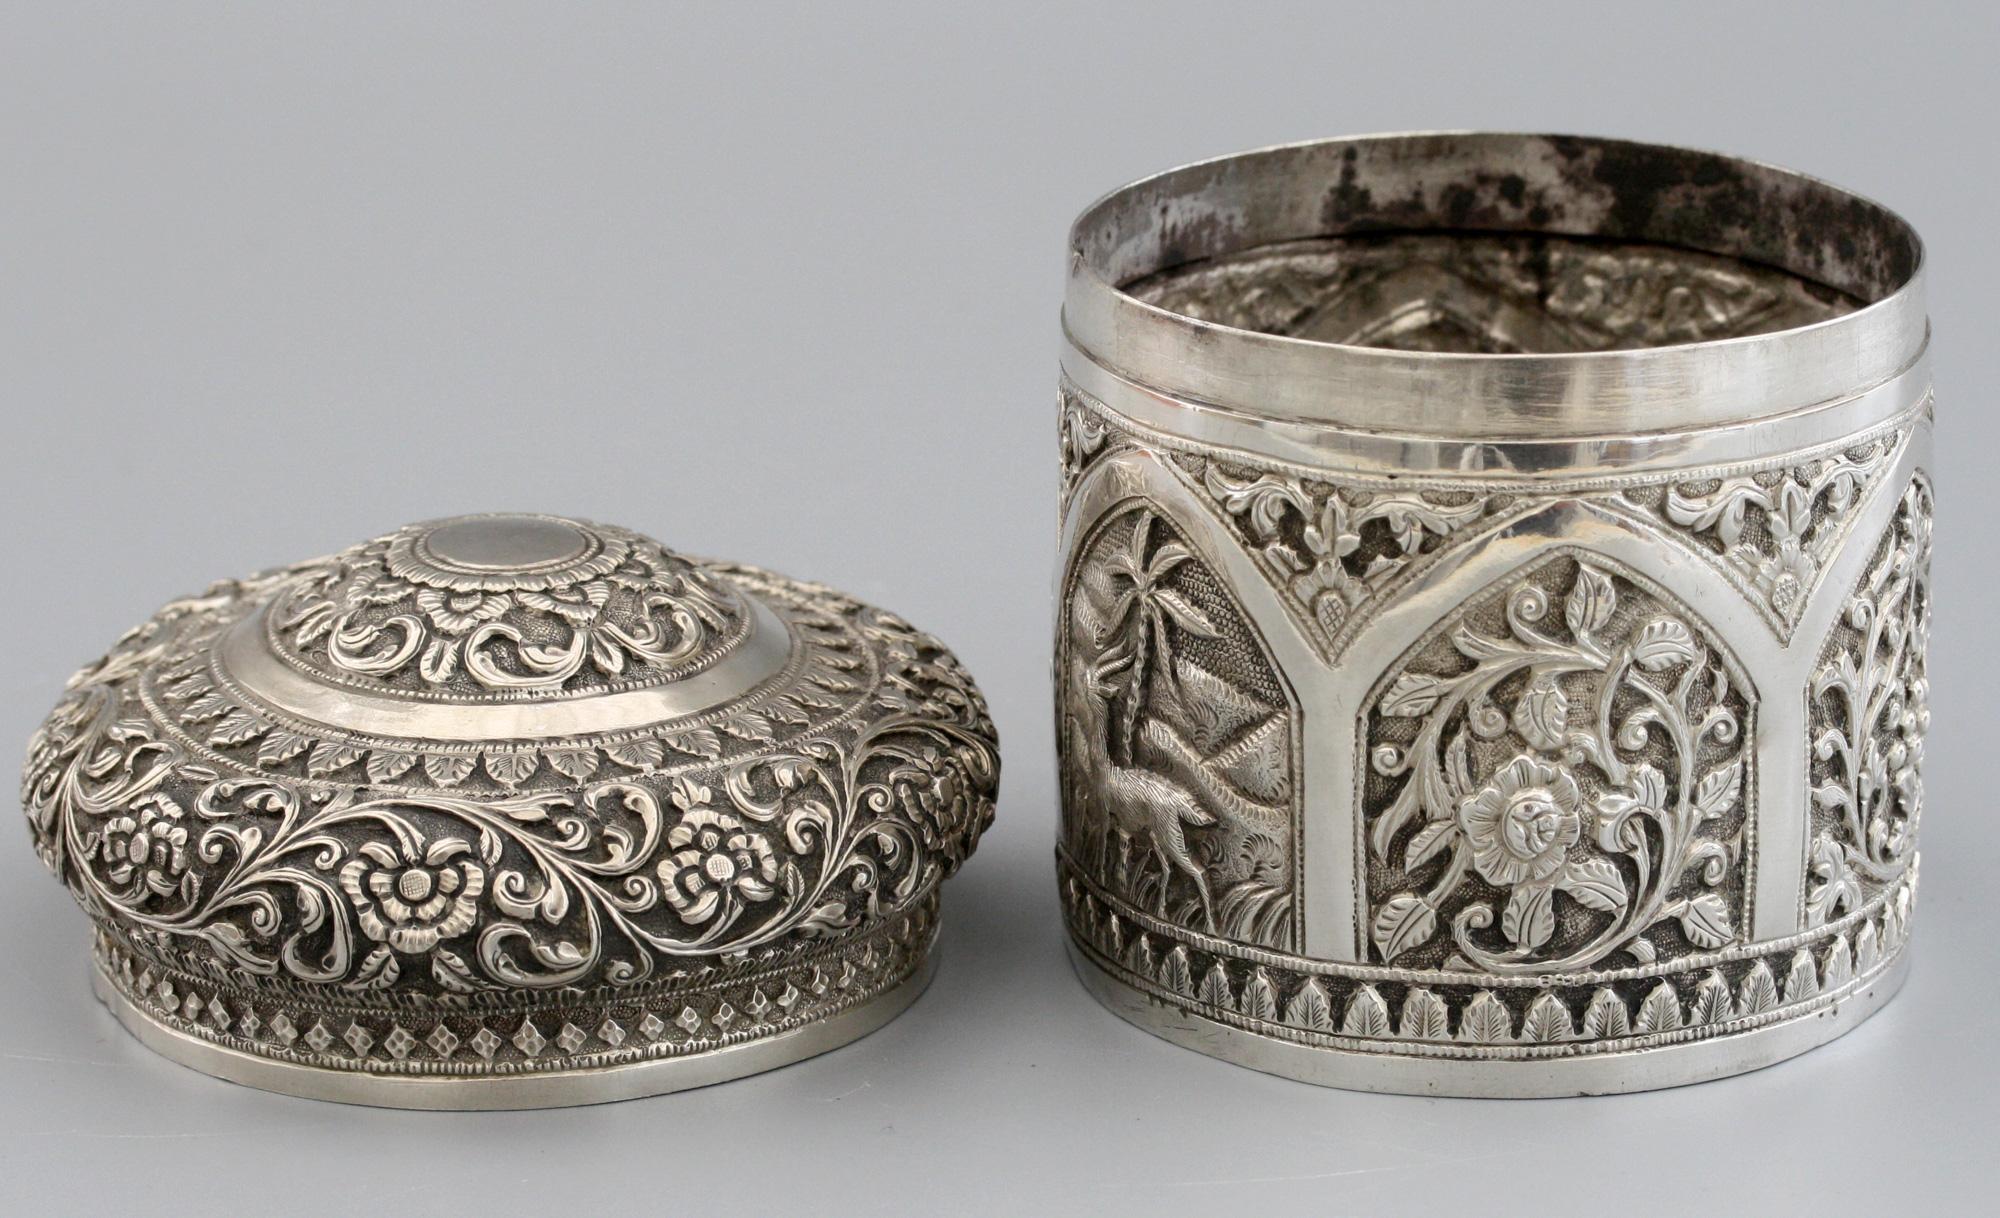 A stunning antique Indian silver lidded tea caddy decorated with ornate panels, scroll and floral designs by J Mankrai of Karachi and dating from circa 1880. This finely made tea caddy has a cylindrical shaped body with six domed relief decorated